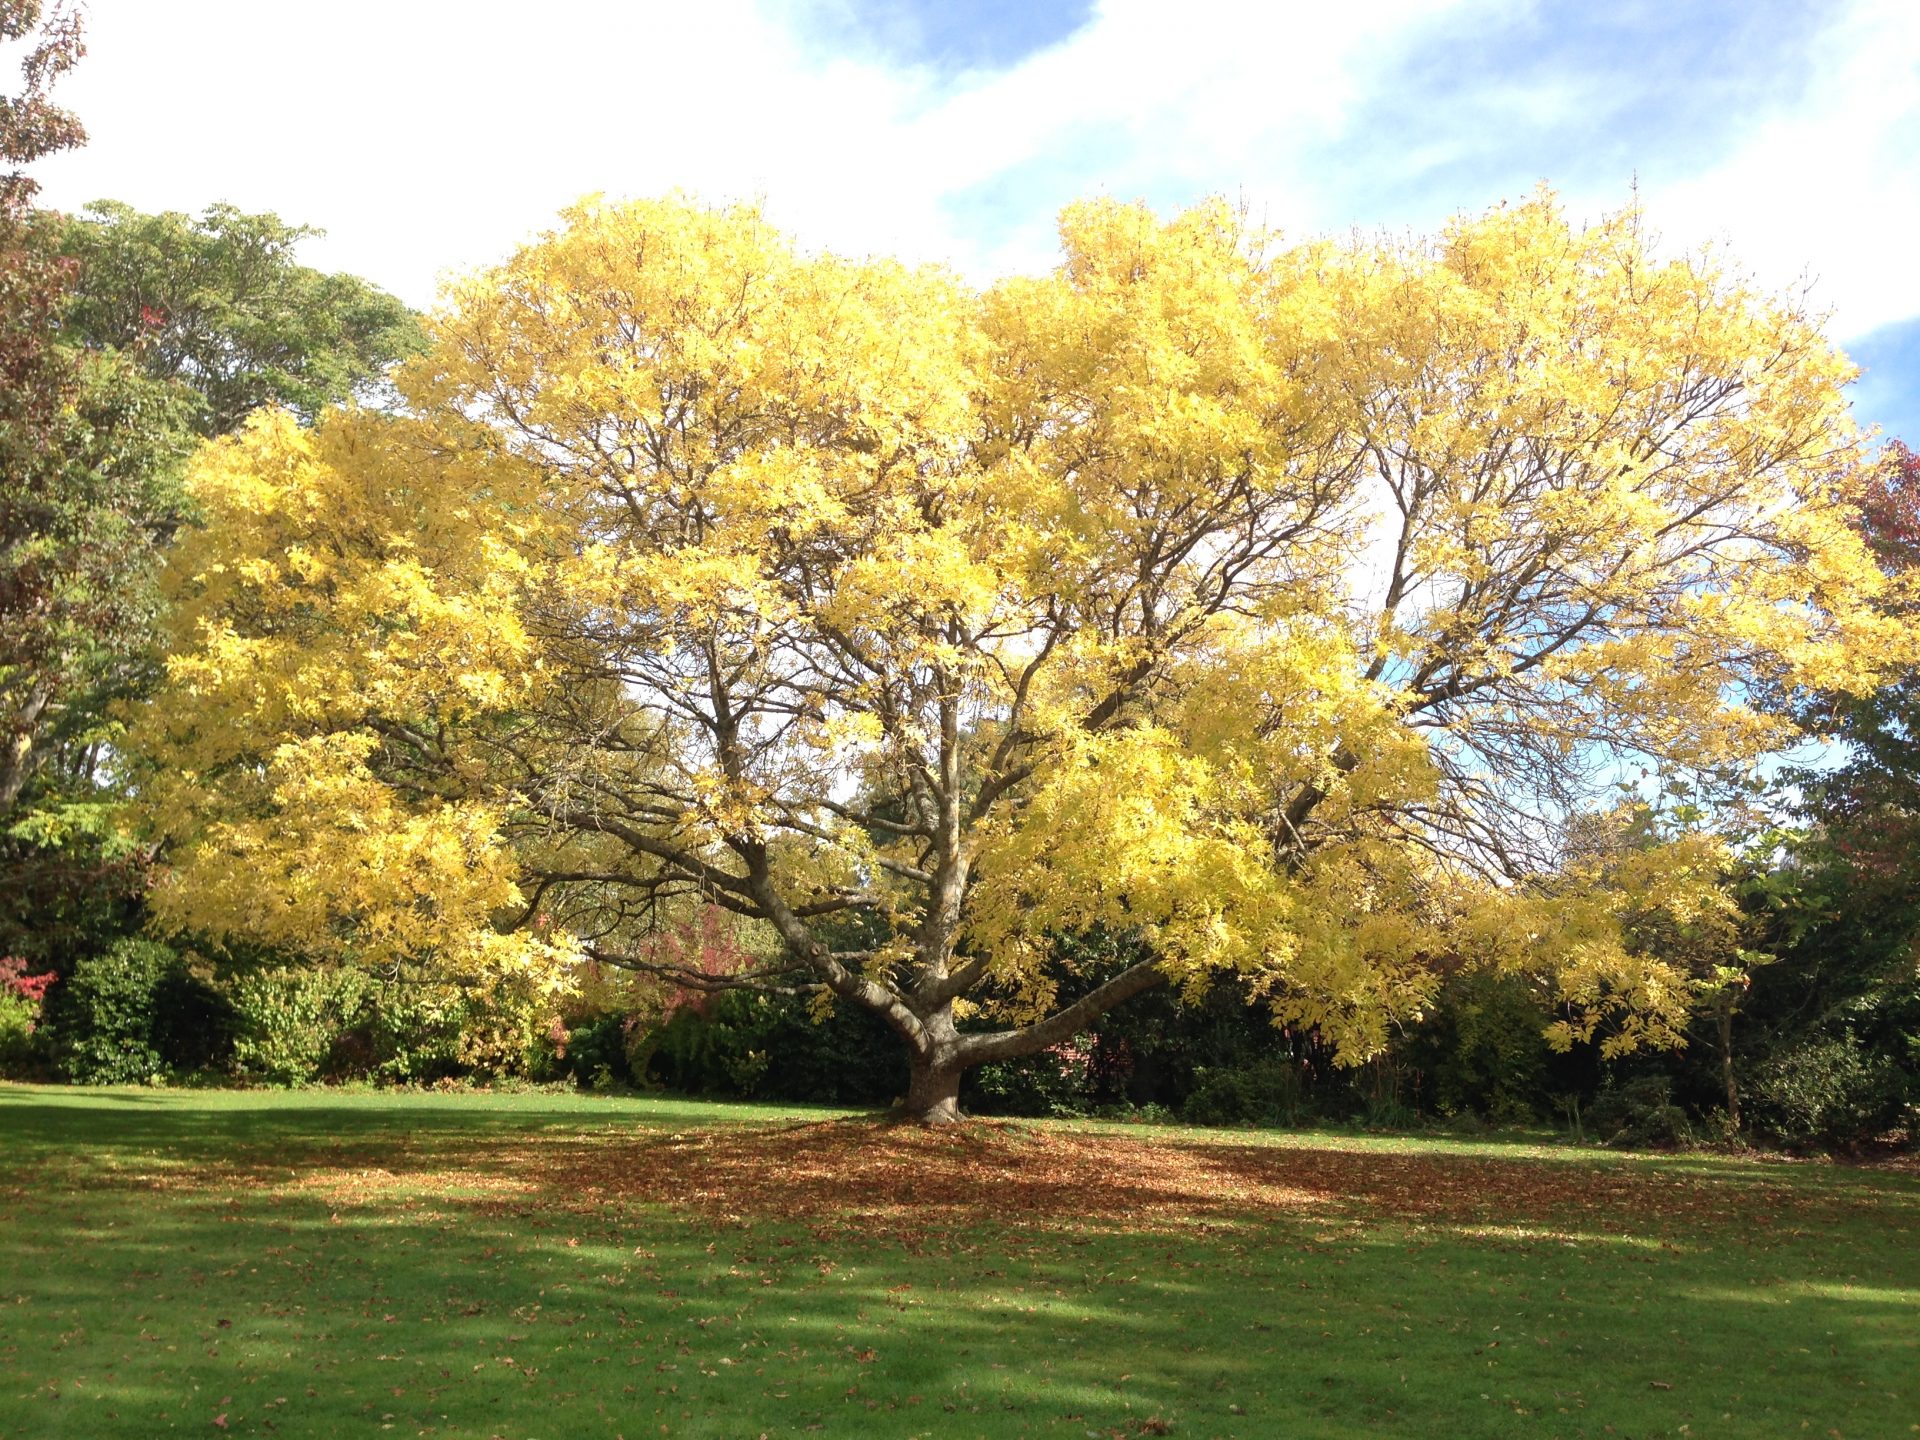 A yellow tree at Lincoln University